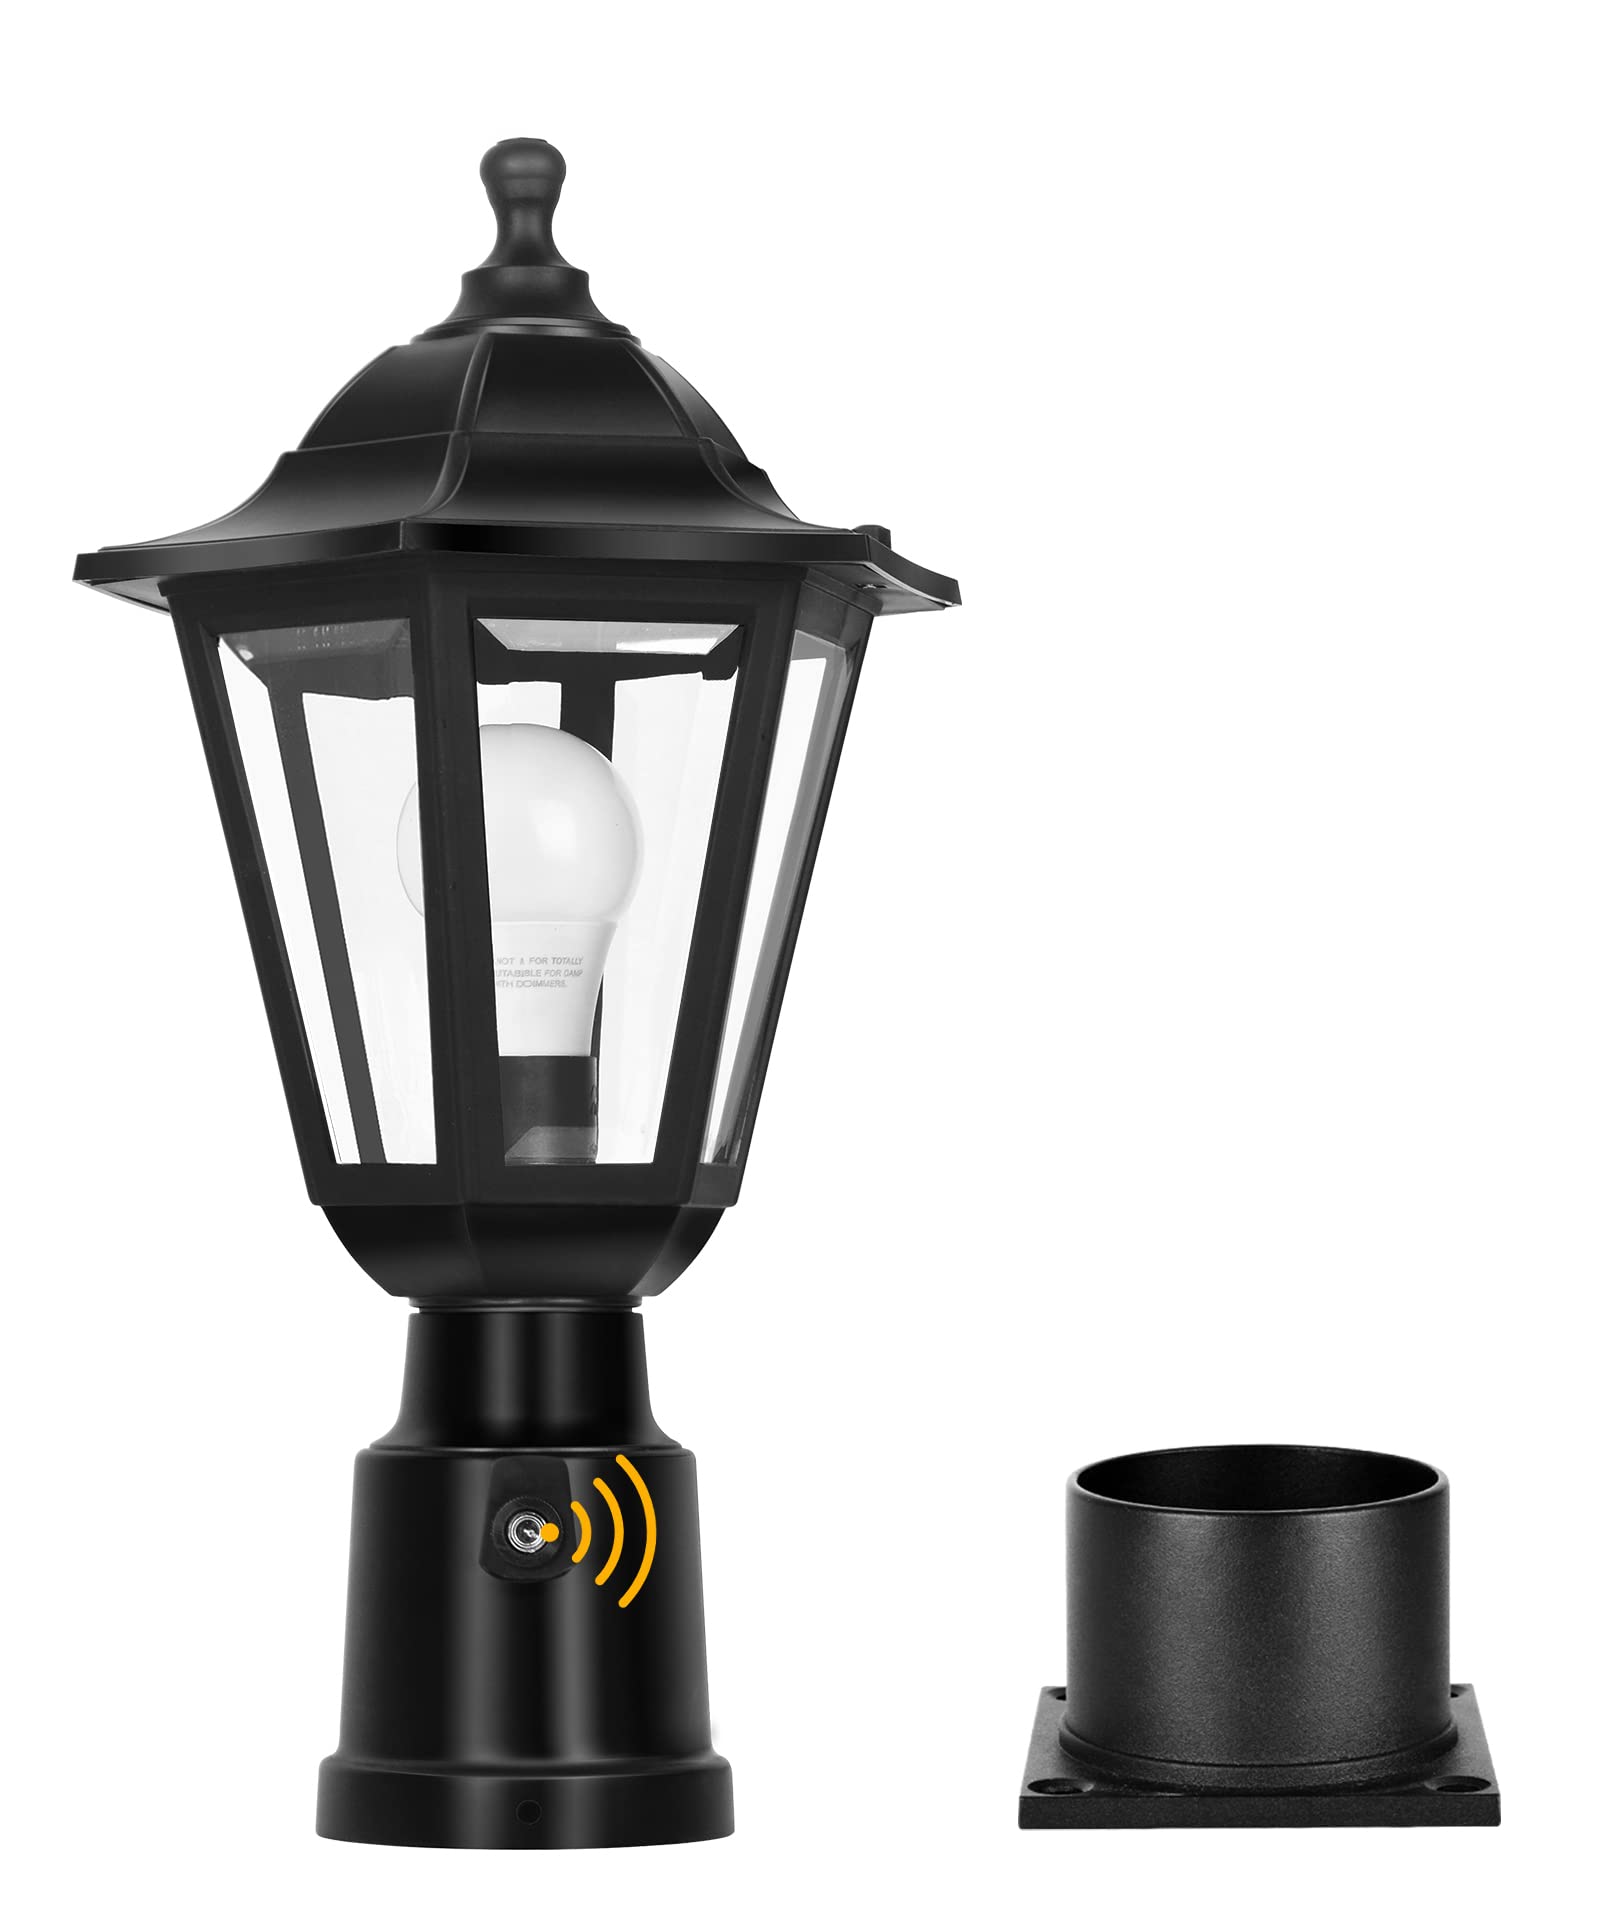 FUDESY Dusk to Dawn Sensor Outdoor Post Light, Waterproof Pole Lantern with Pier Mount Base, Exterior Plastic Lamp Light Fixture, for Garden, Patio, Pathway, FDS6163B1PS, Black, LED Bulb Included